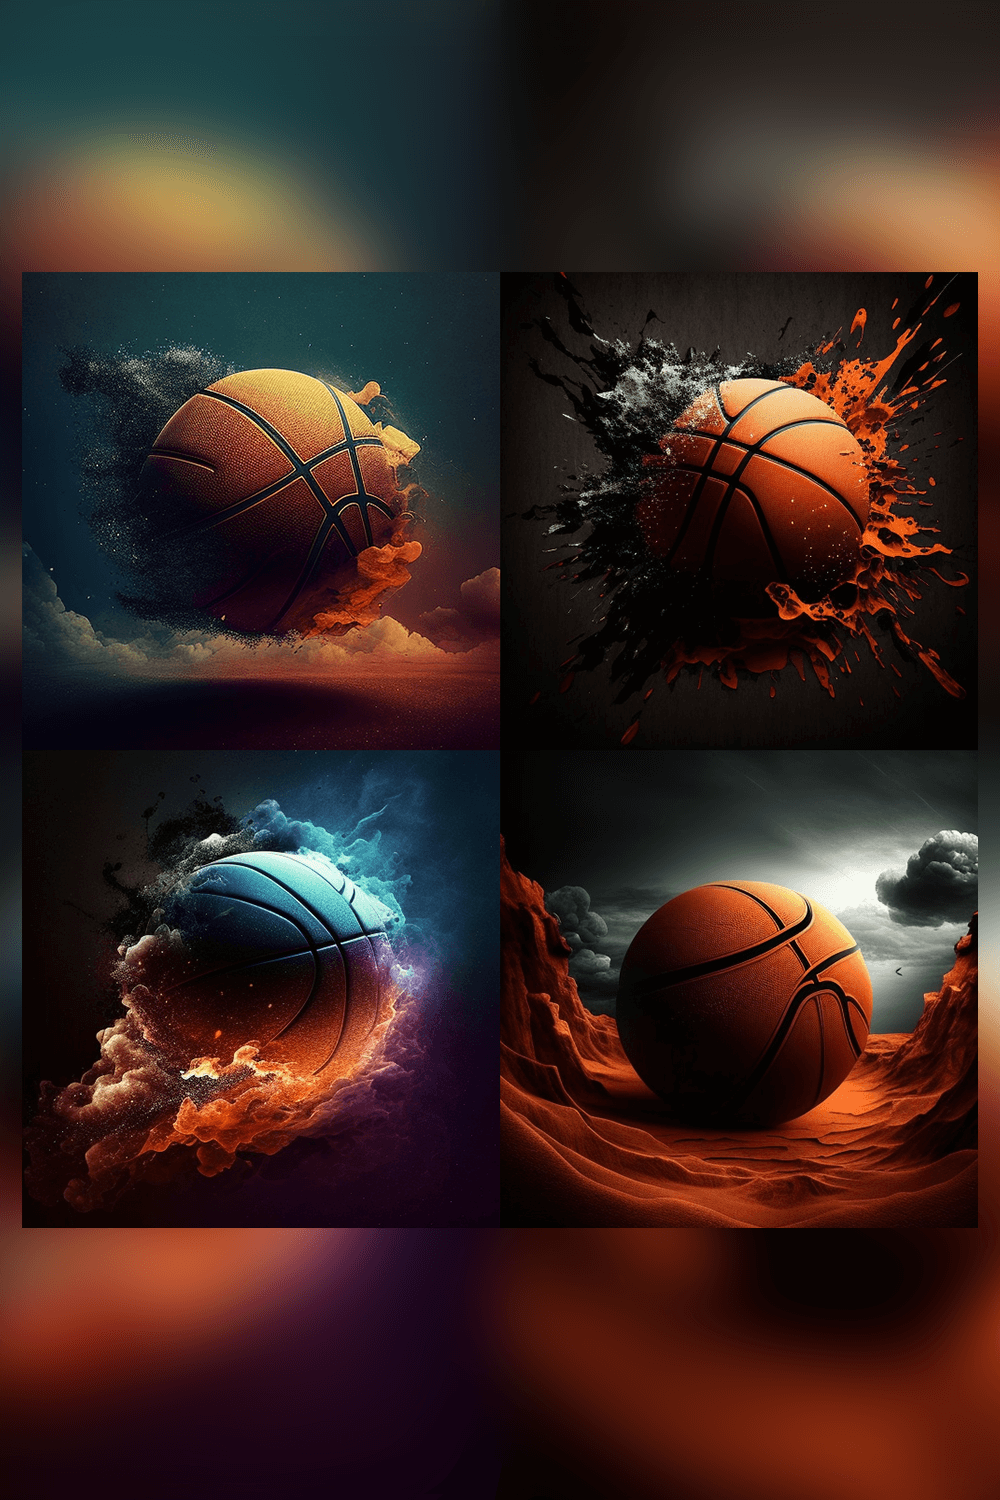 Series of photoshopped images of a basketball.